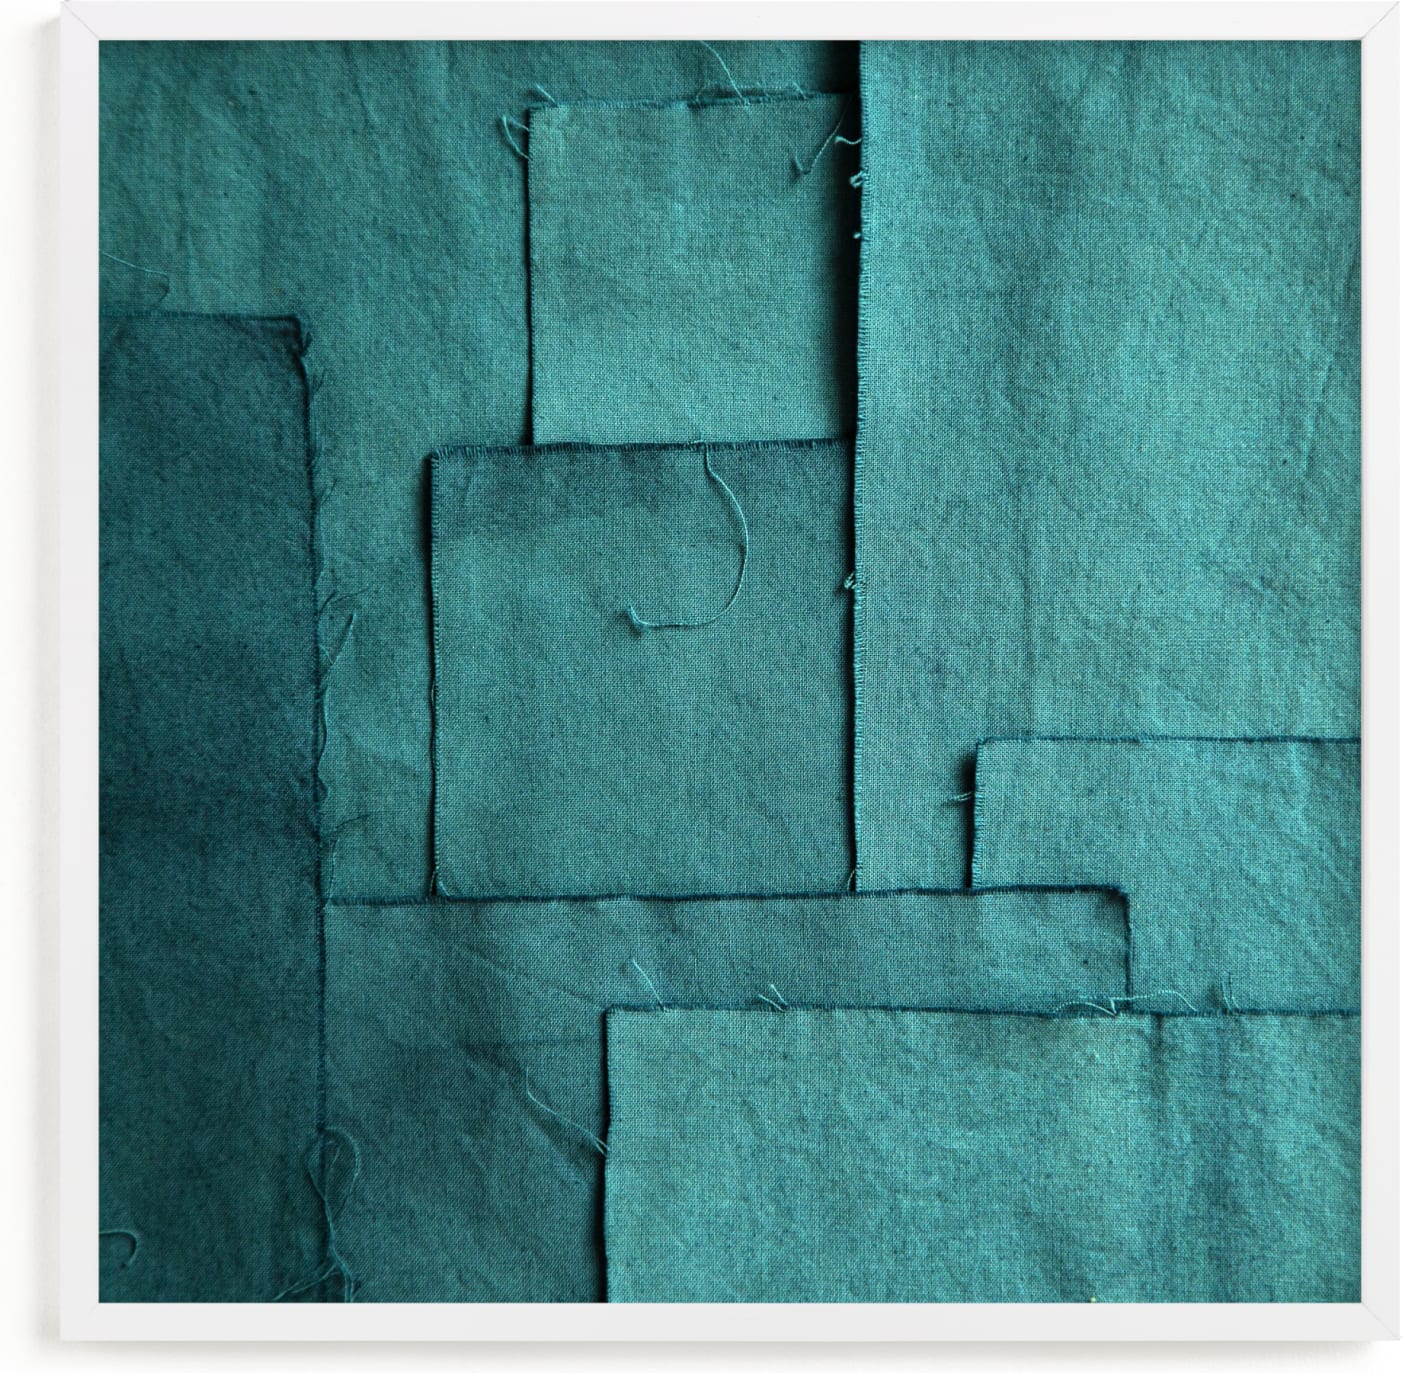 This is a blue art by Debra Pruskowski called Gathered Remnants I.